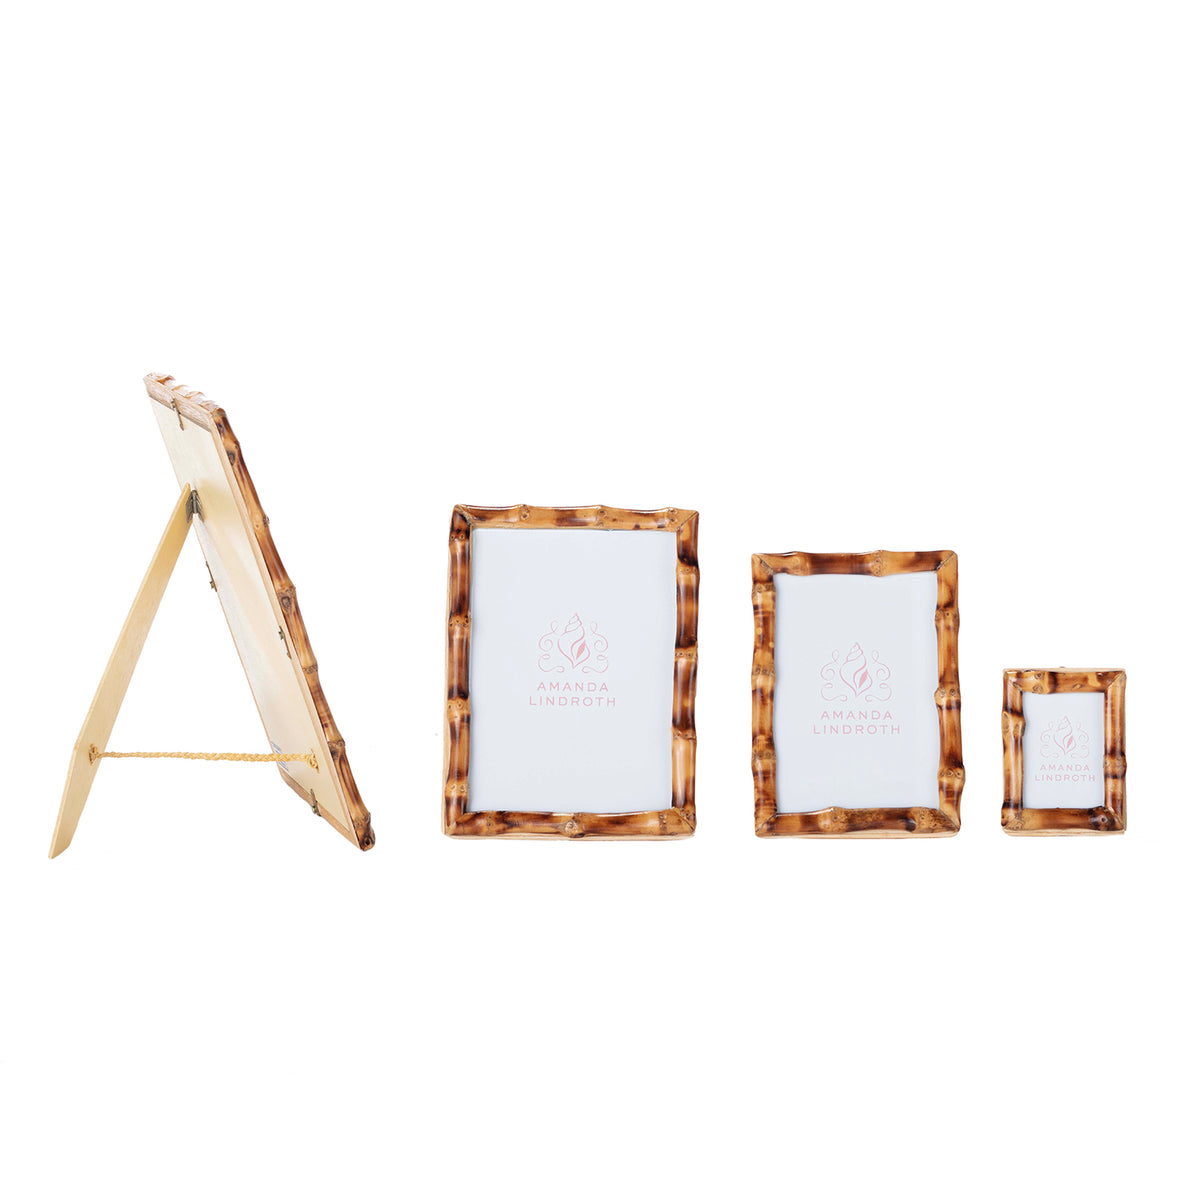 Bamboo Picture Frames – Amanda Lindroth